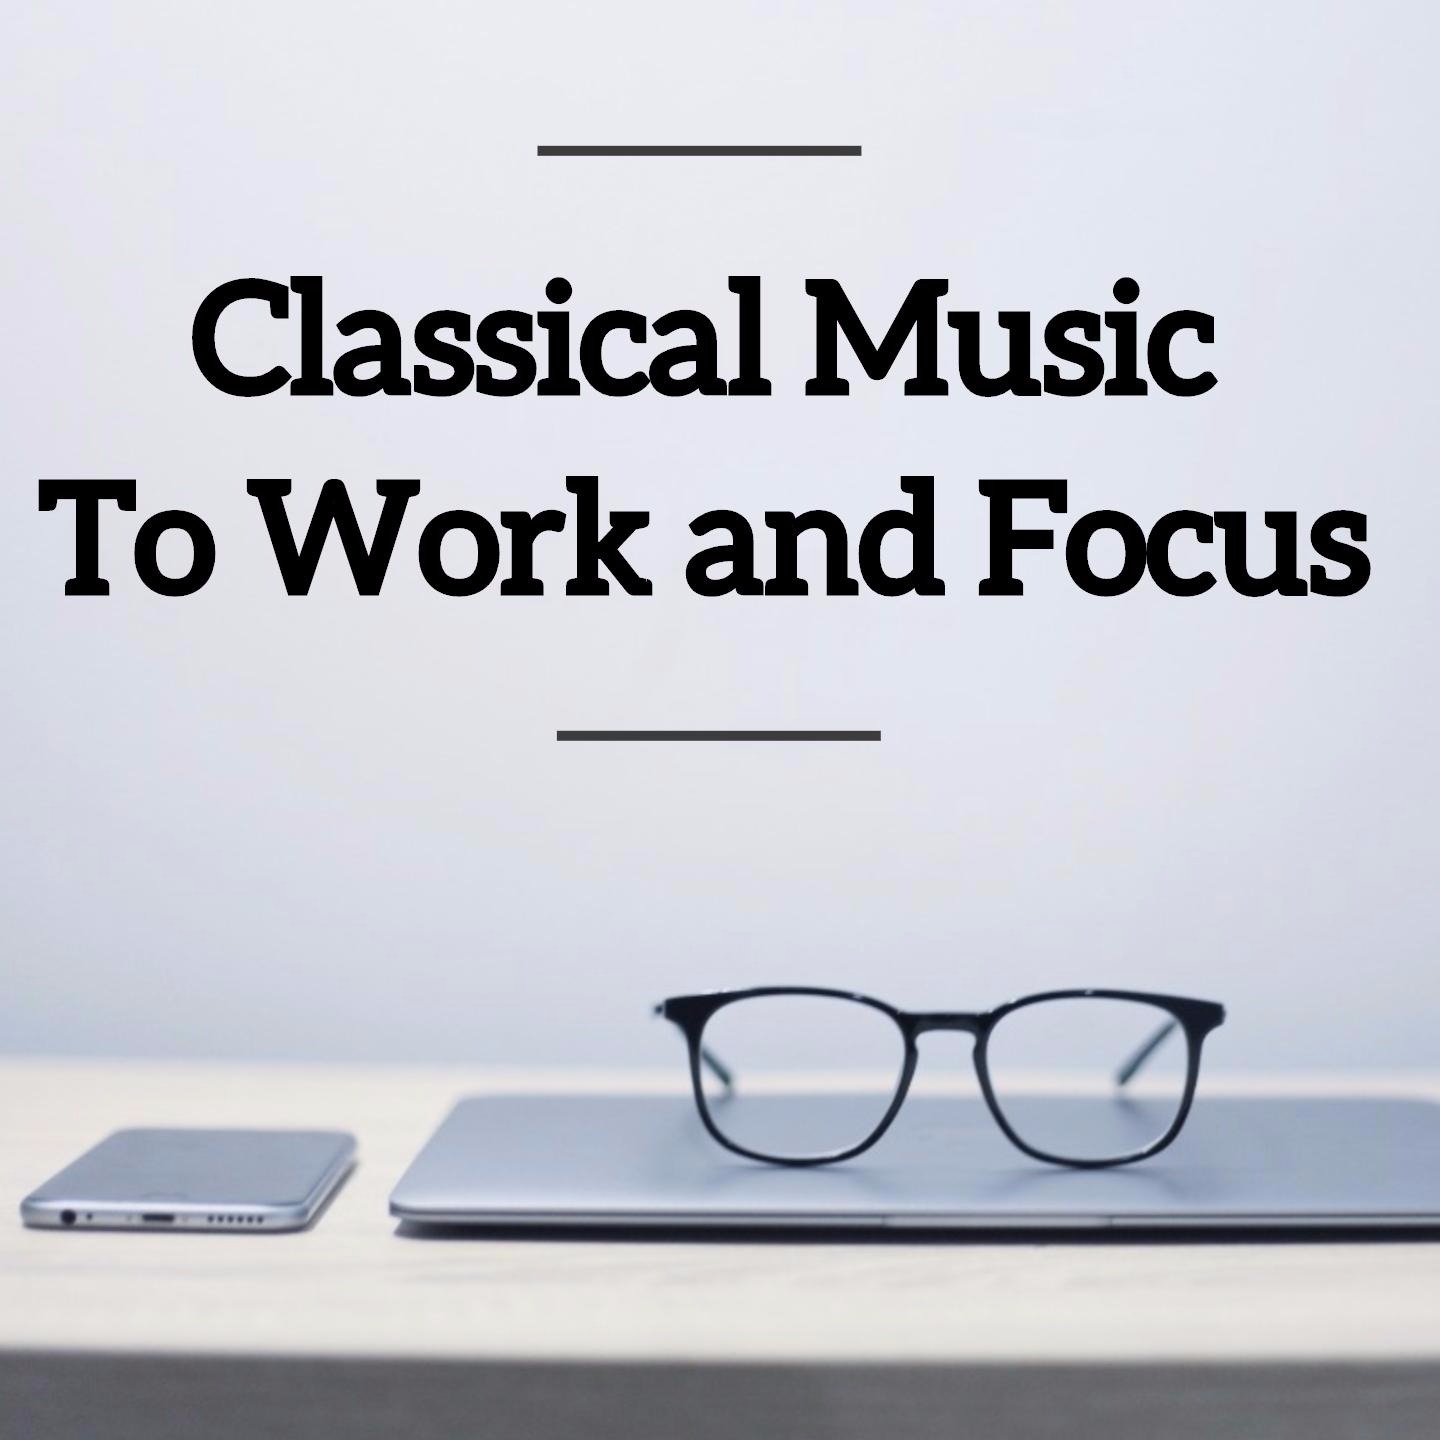 Classical Music To Work and Focus